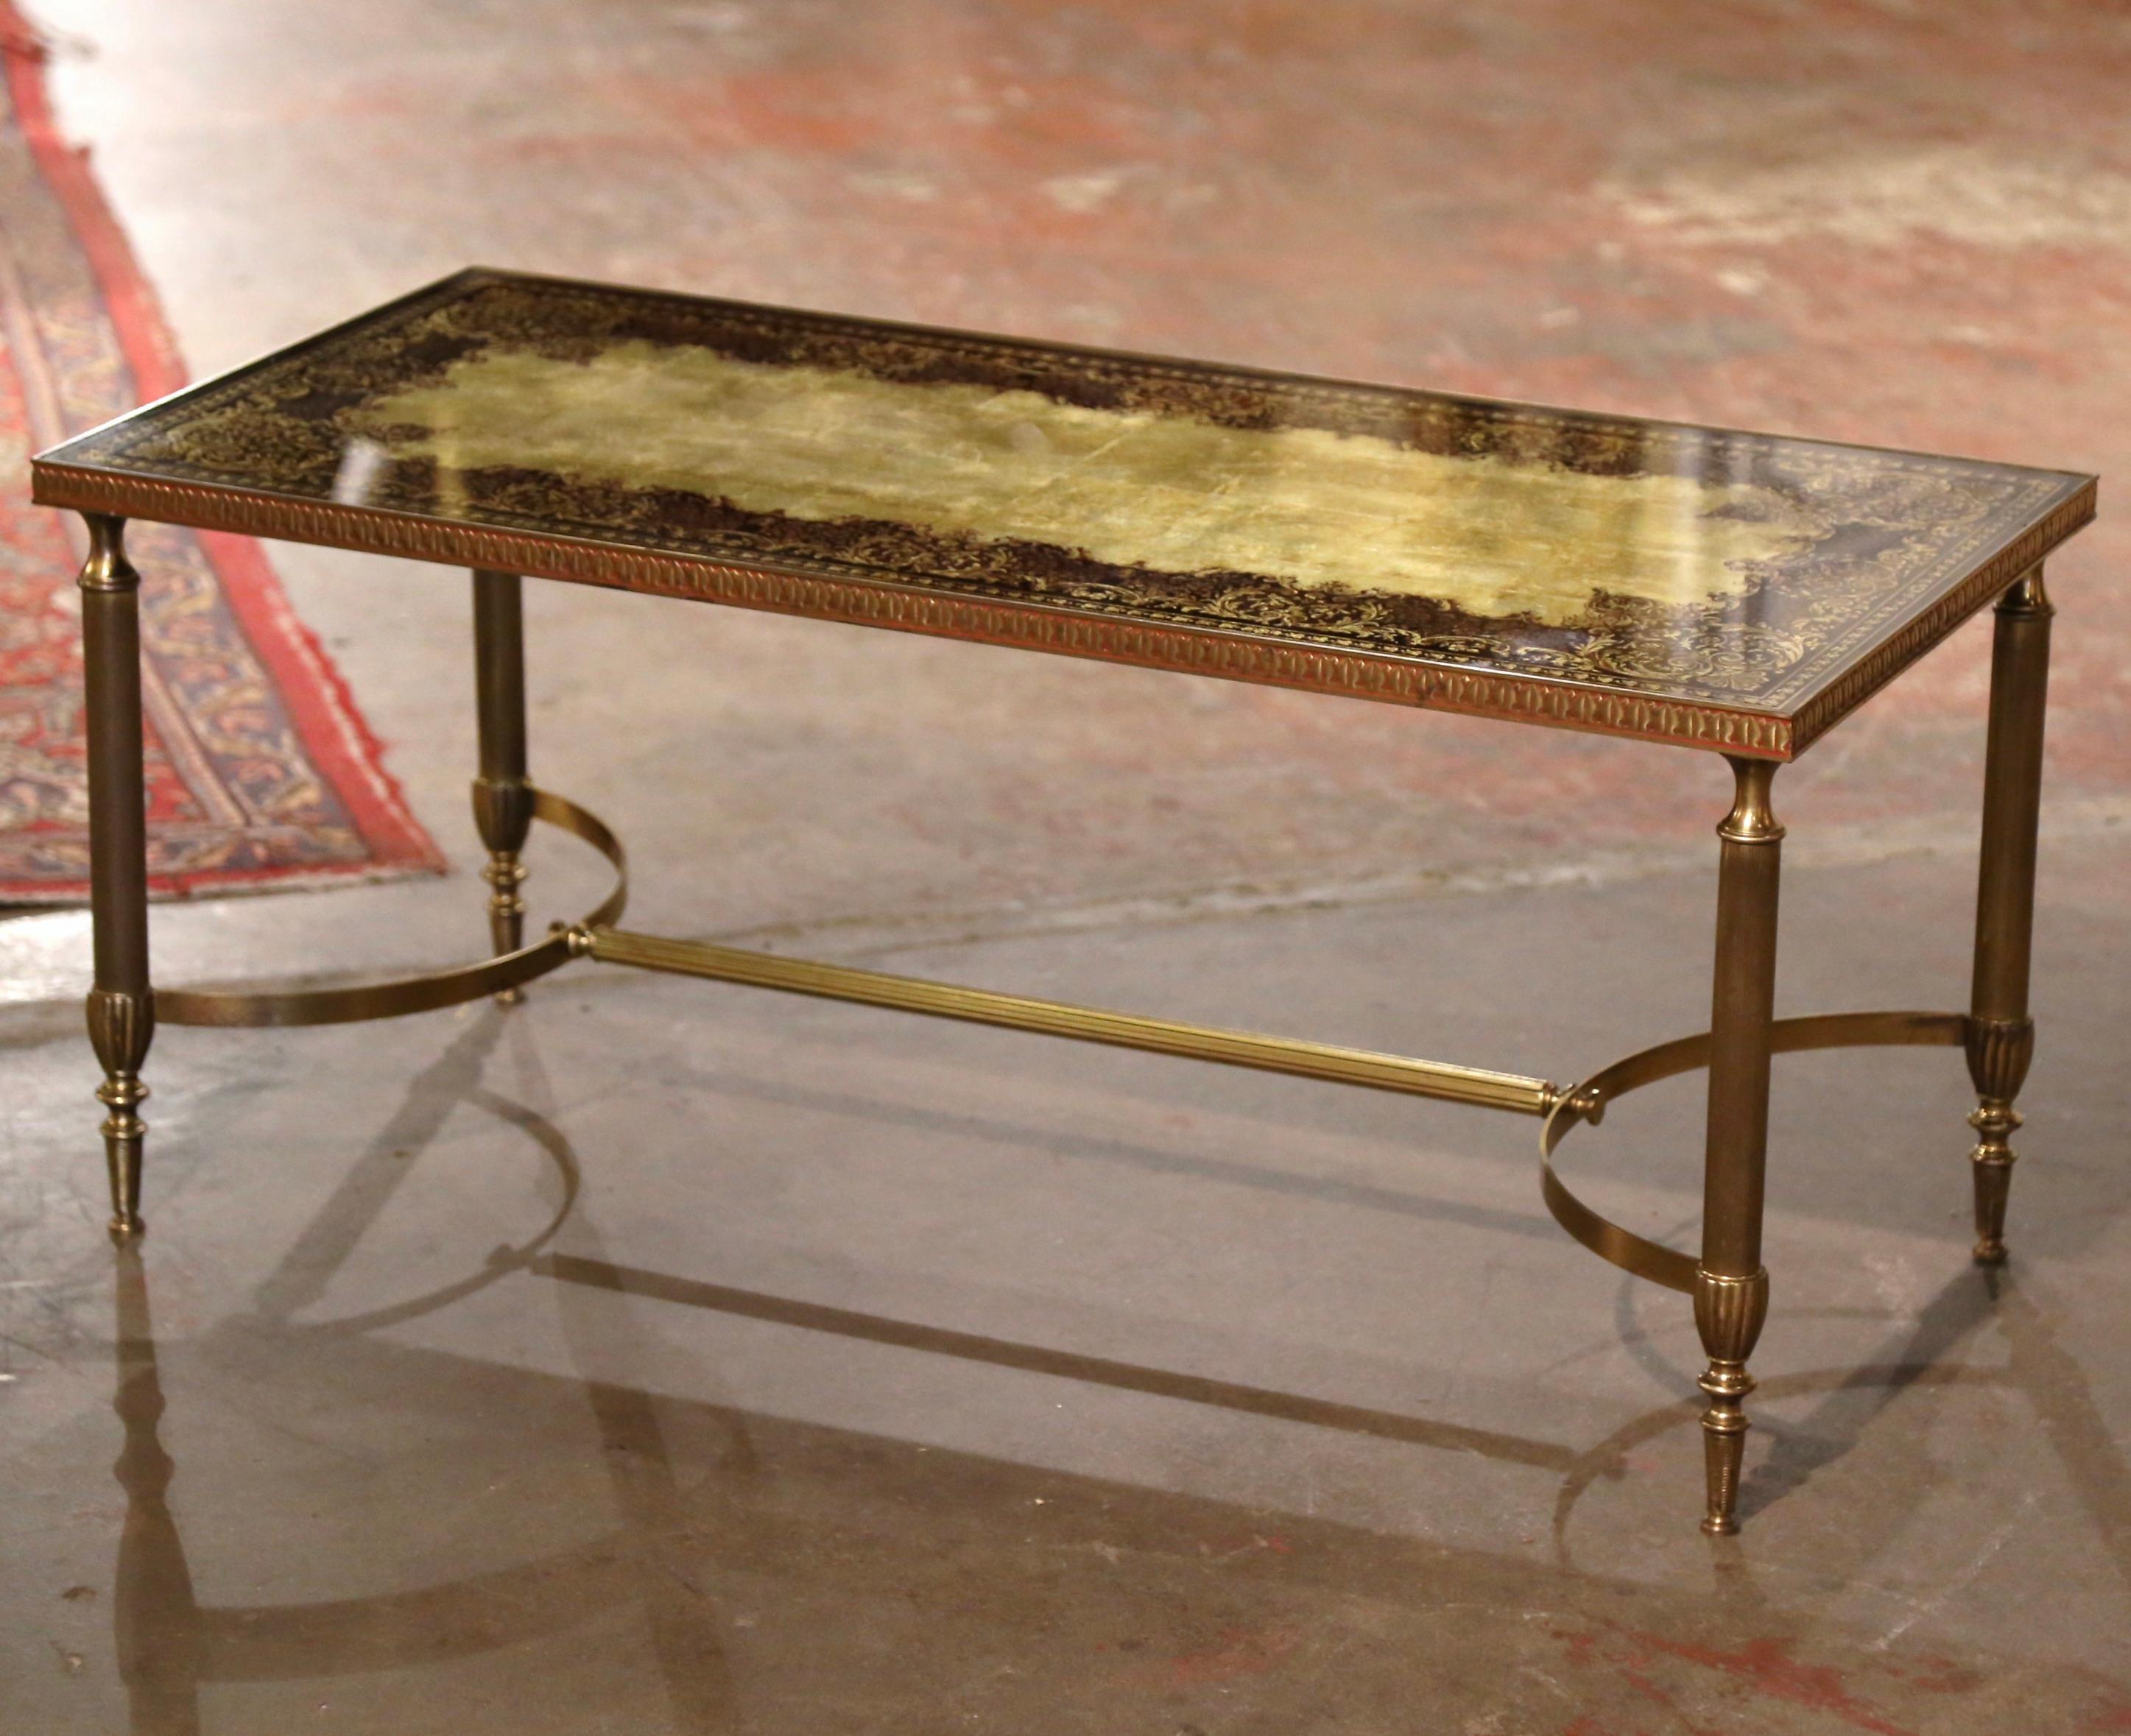 Midcentury French Maison Baguès Brass Coffee Table with Eglomisé Glass Top In Excellent Condition For Sale In Dallas, TX